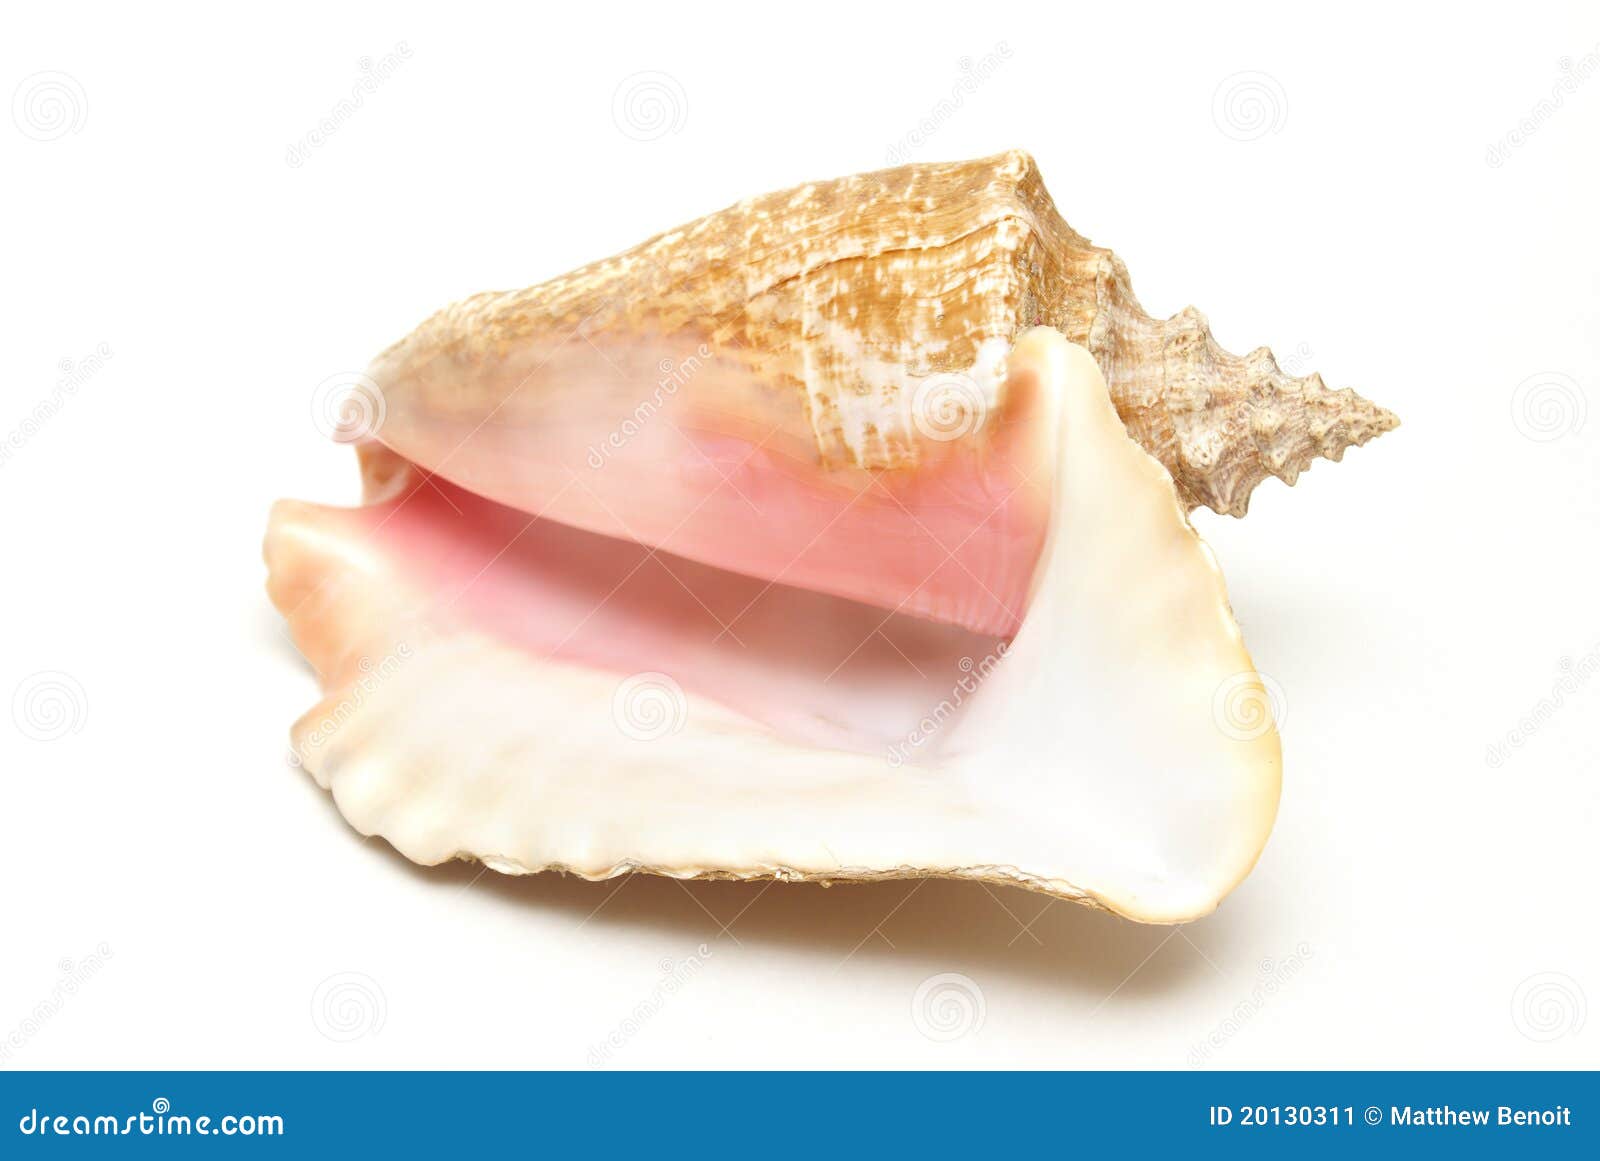 large conch shell